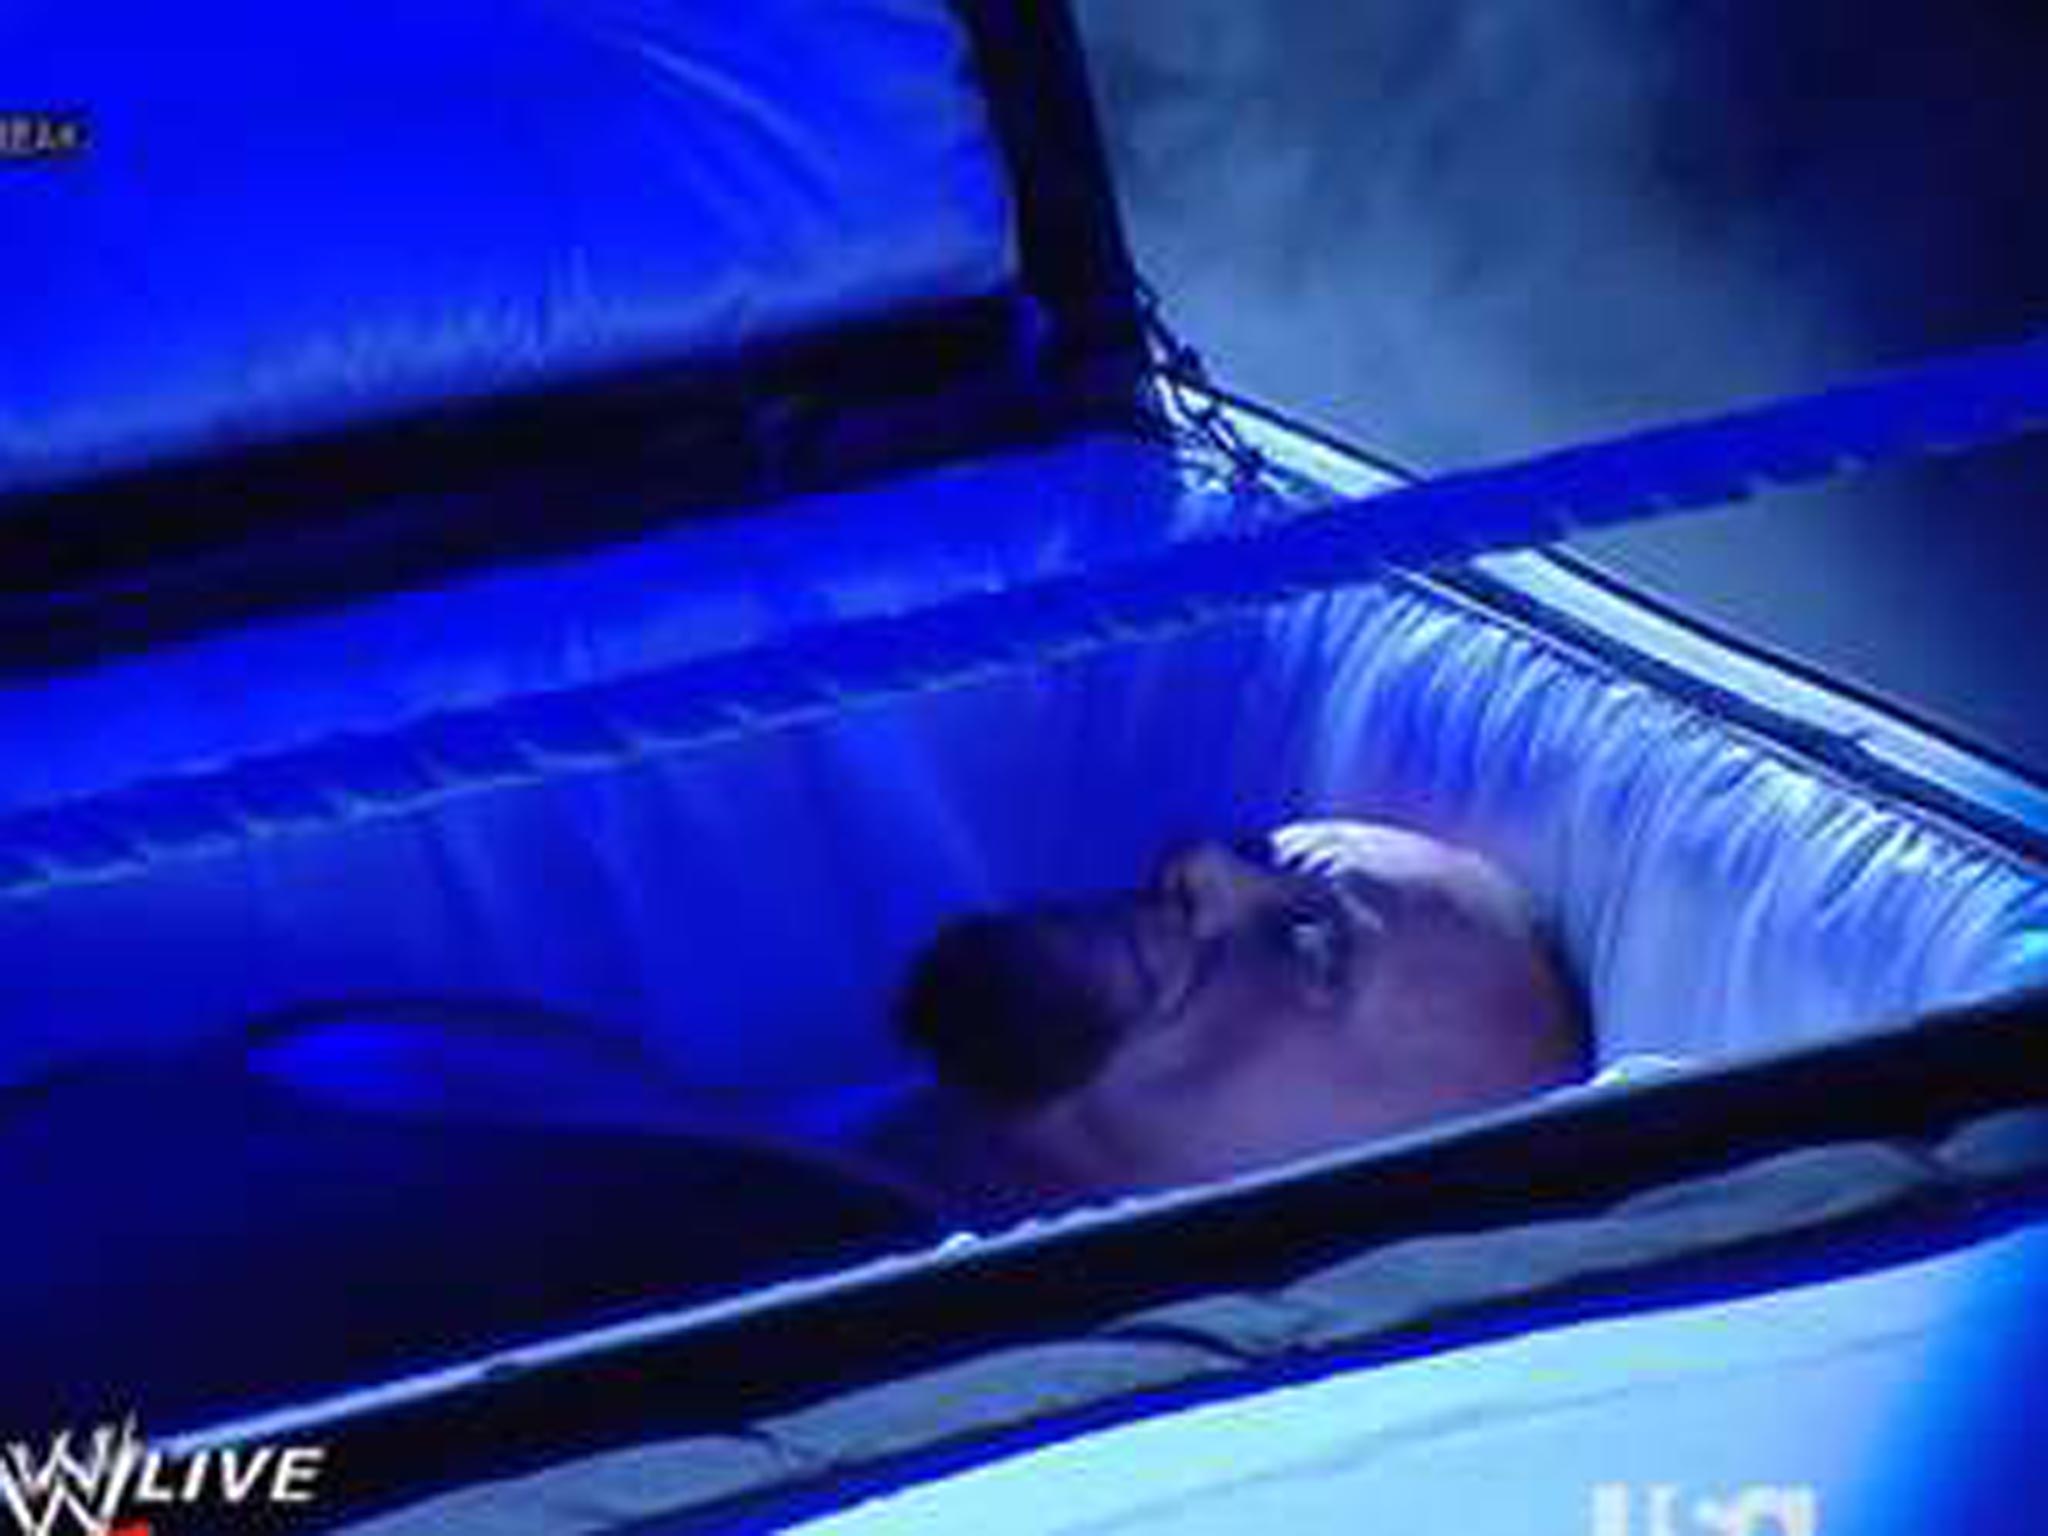 The Undertaker emerges from a casket to confront Brock Lesnar